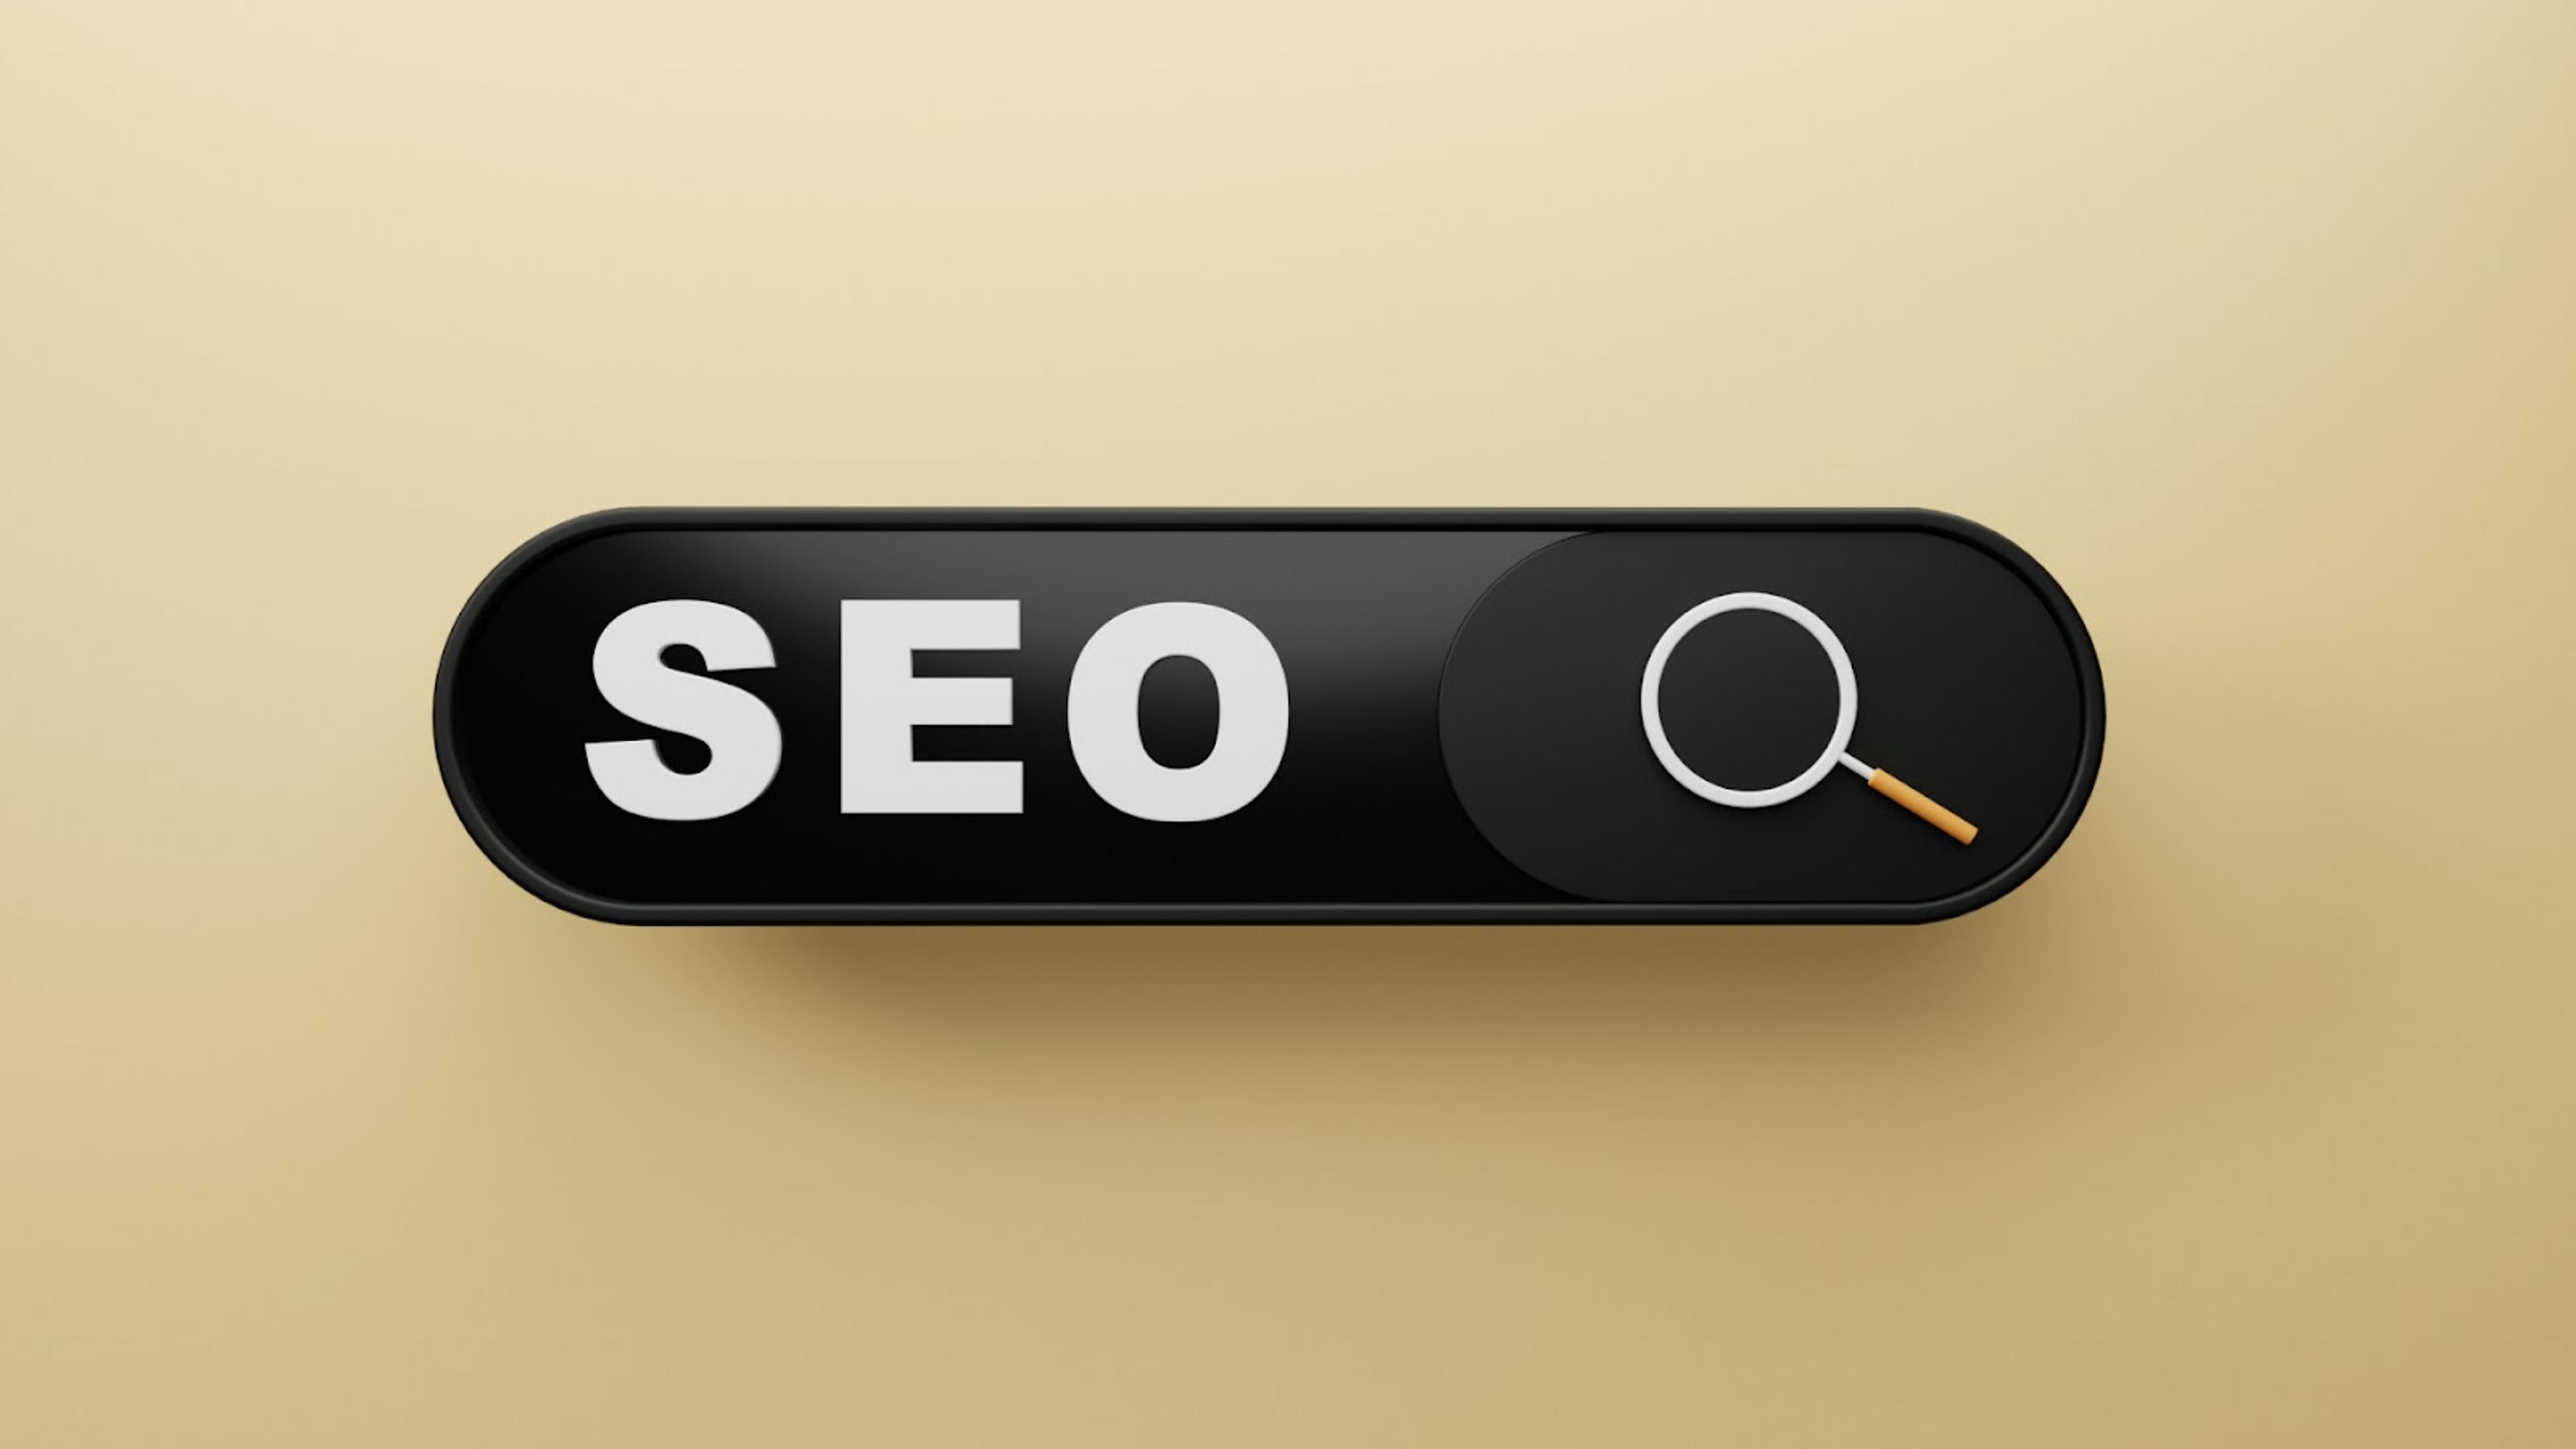 Why Is On-Page SEO Important?